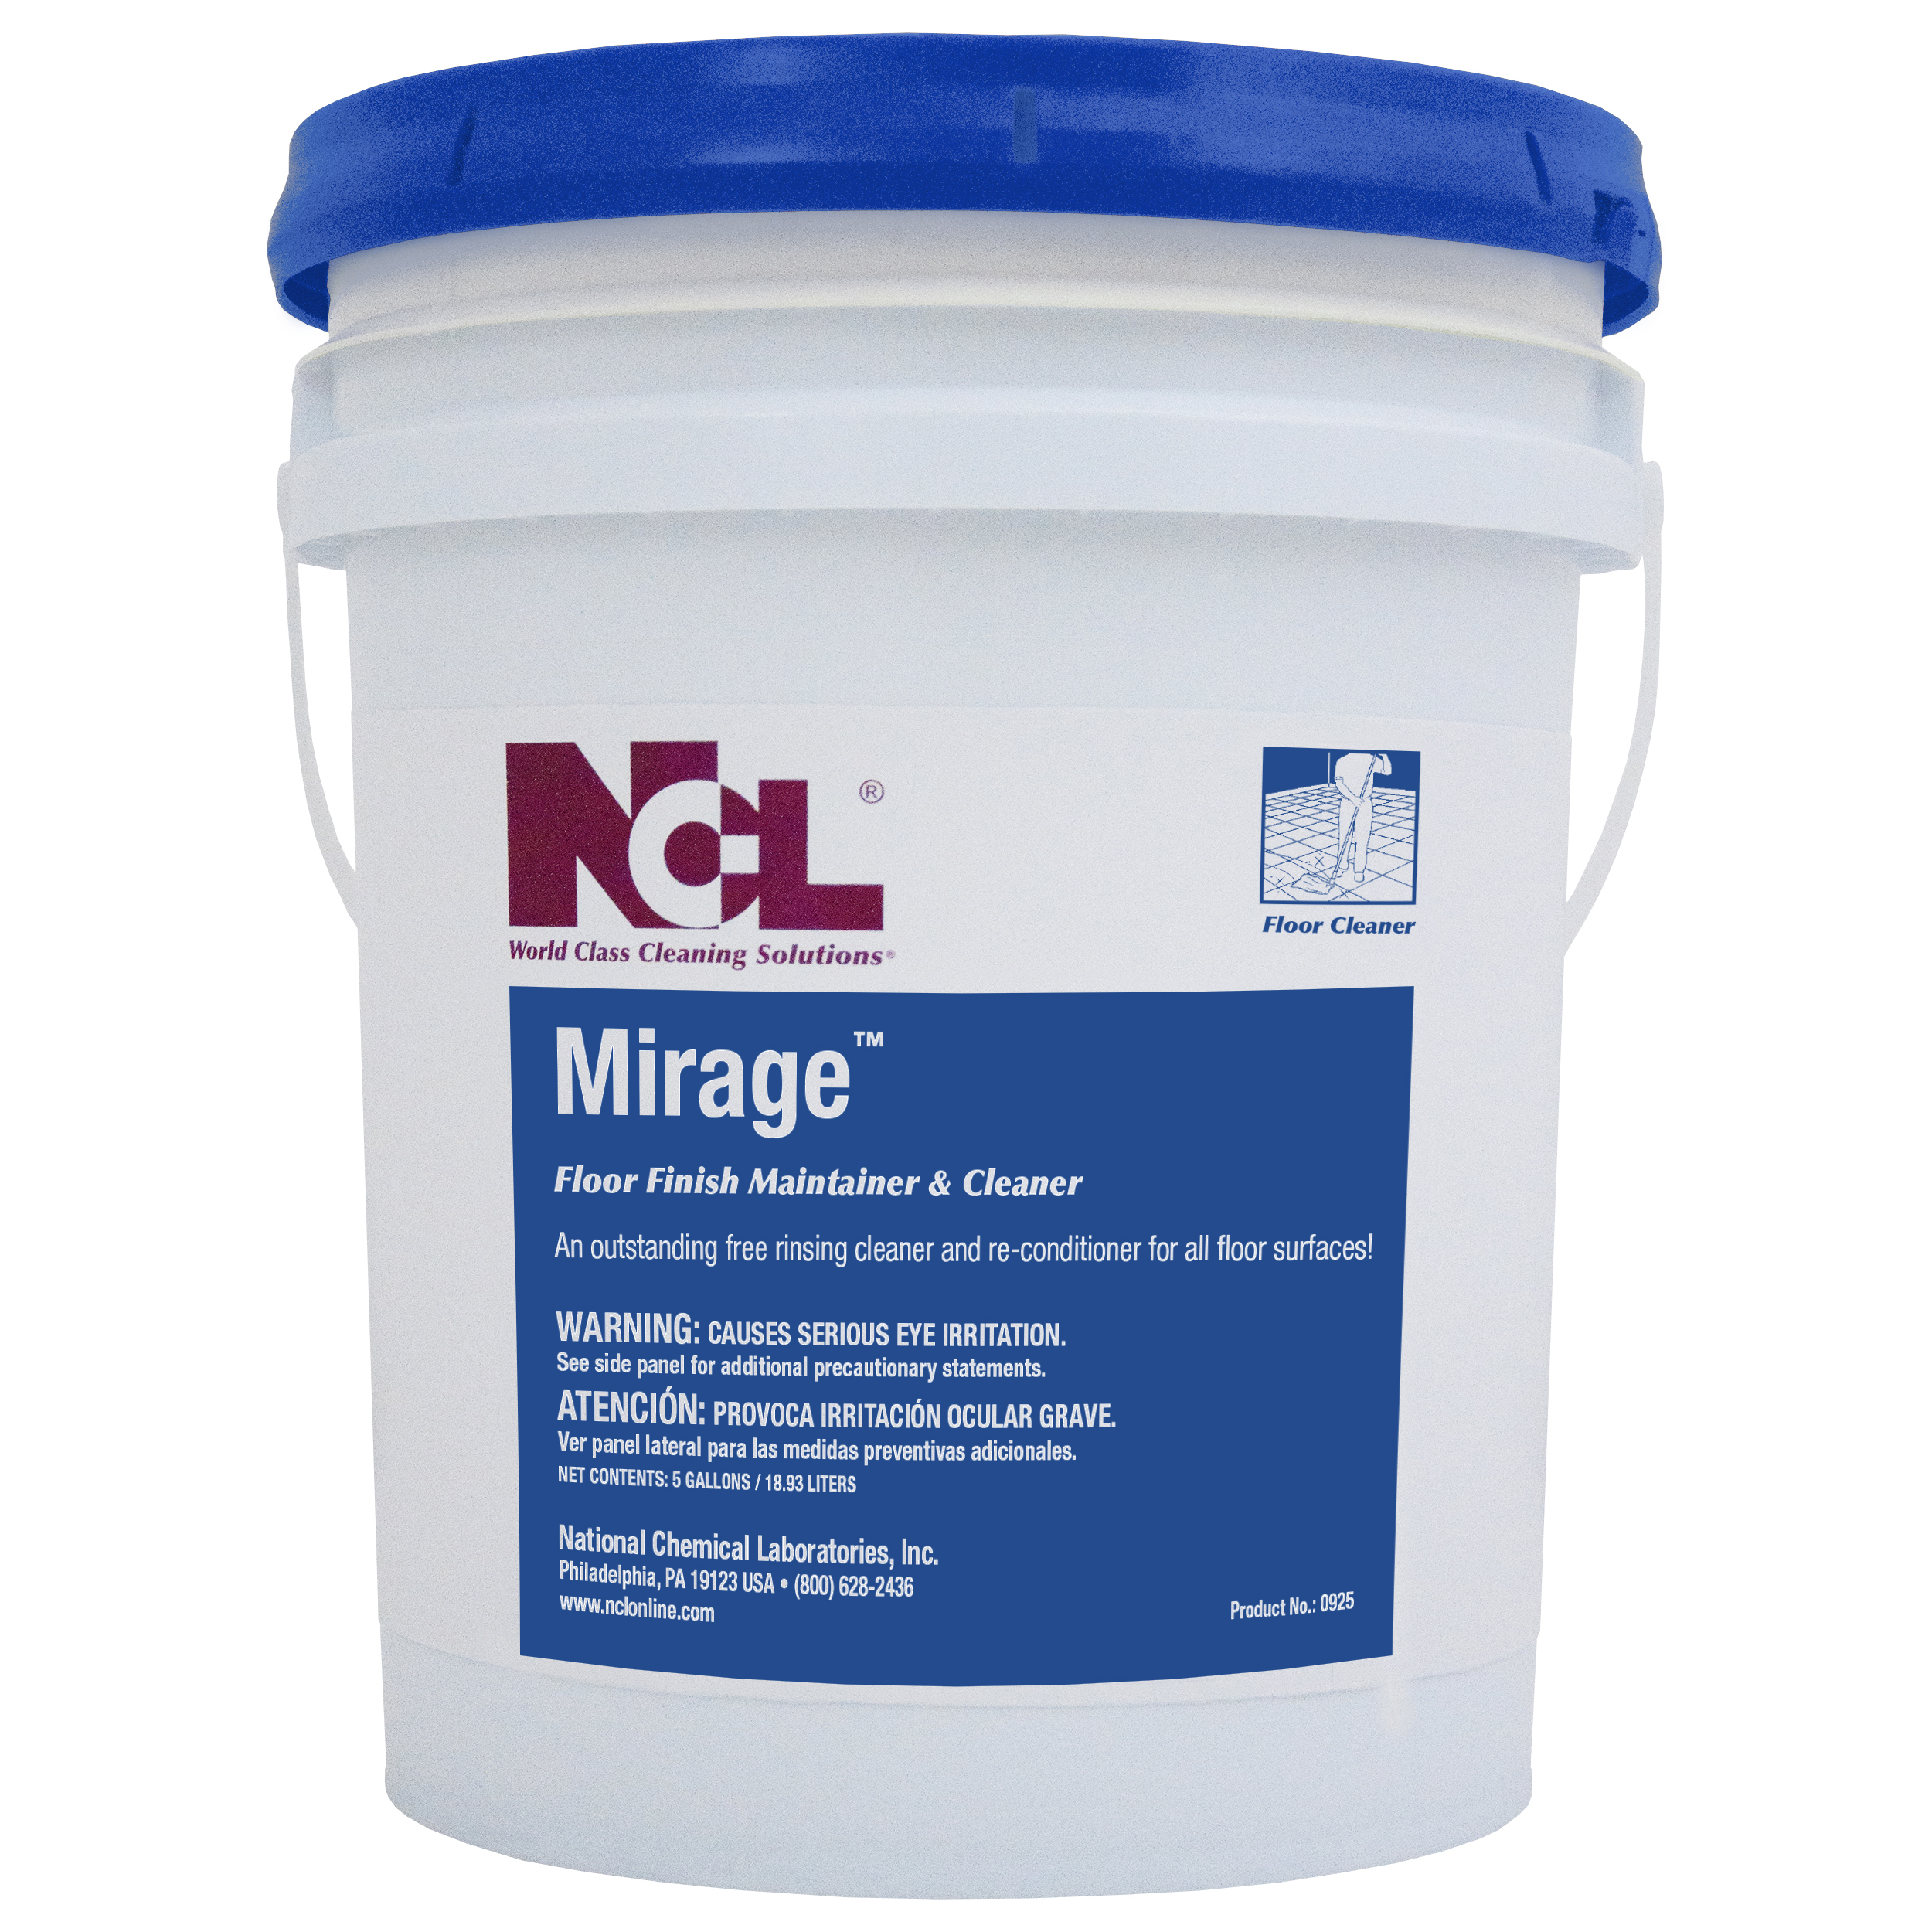  MIRAGE Neutral Floor Finish Maintainer & Cleaner 5 Gal. Pail (NCL0925-21) 